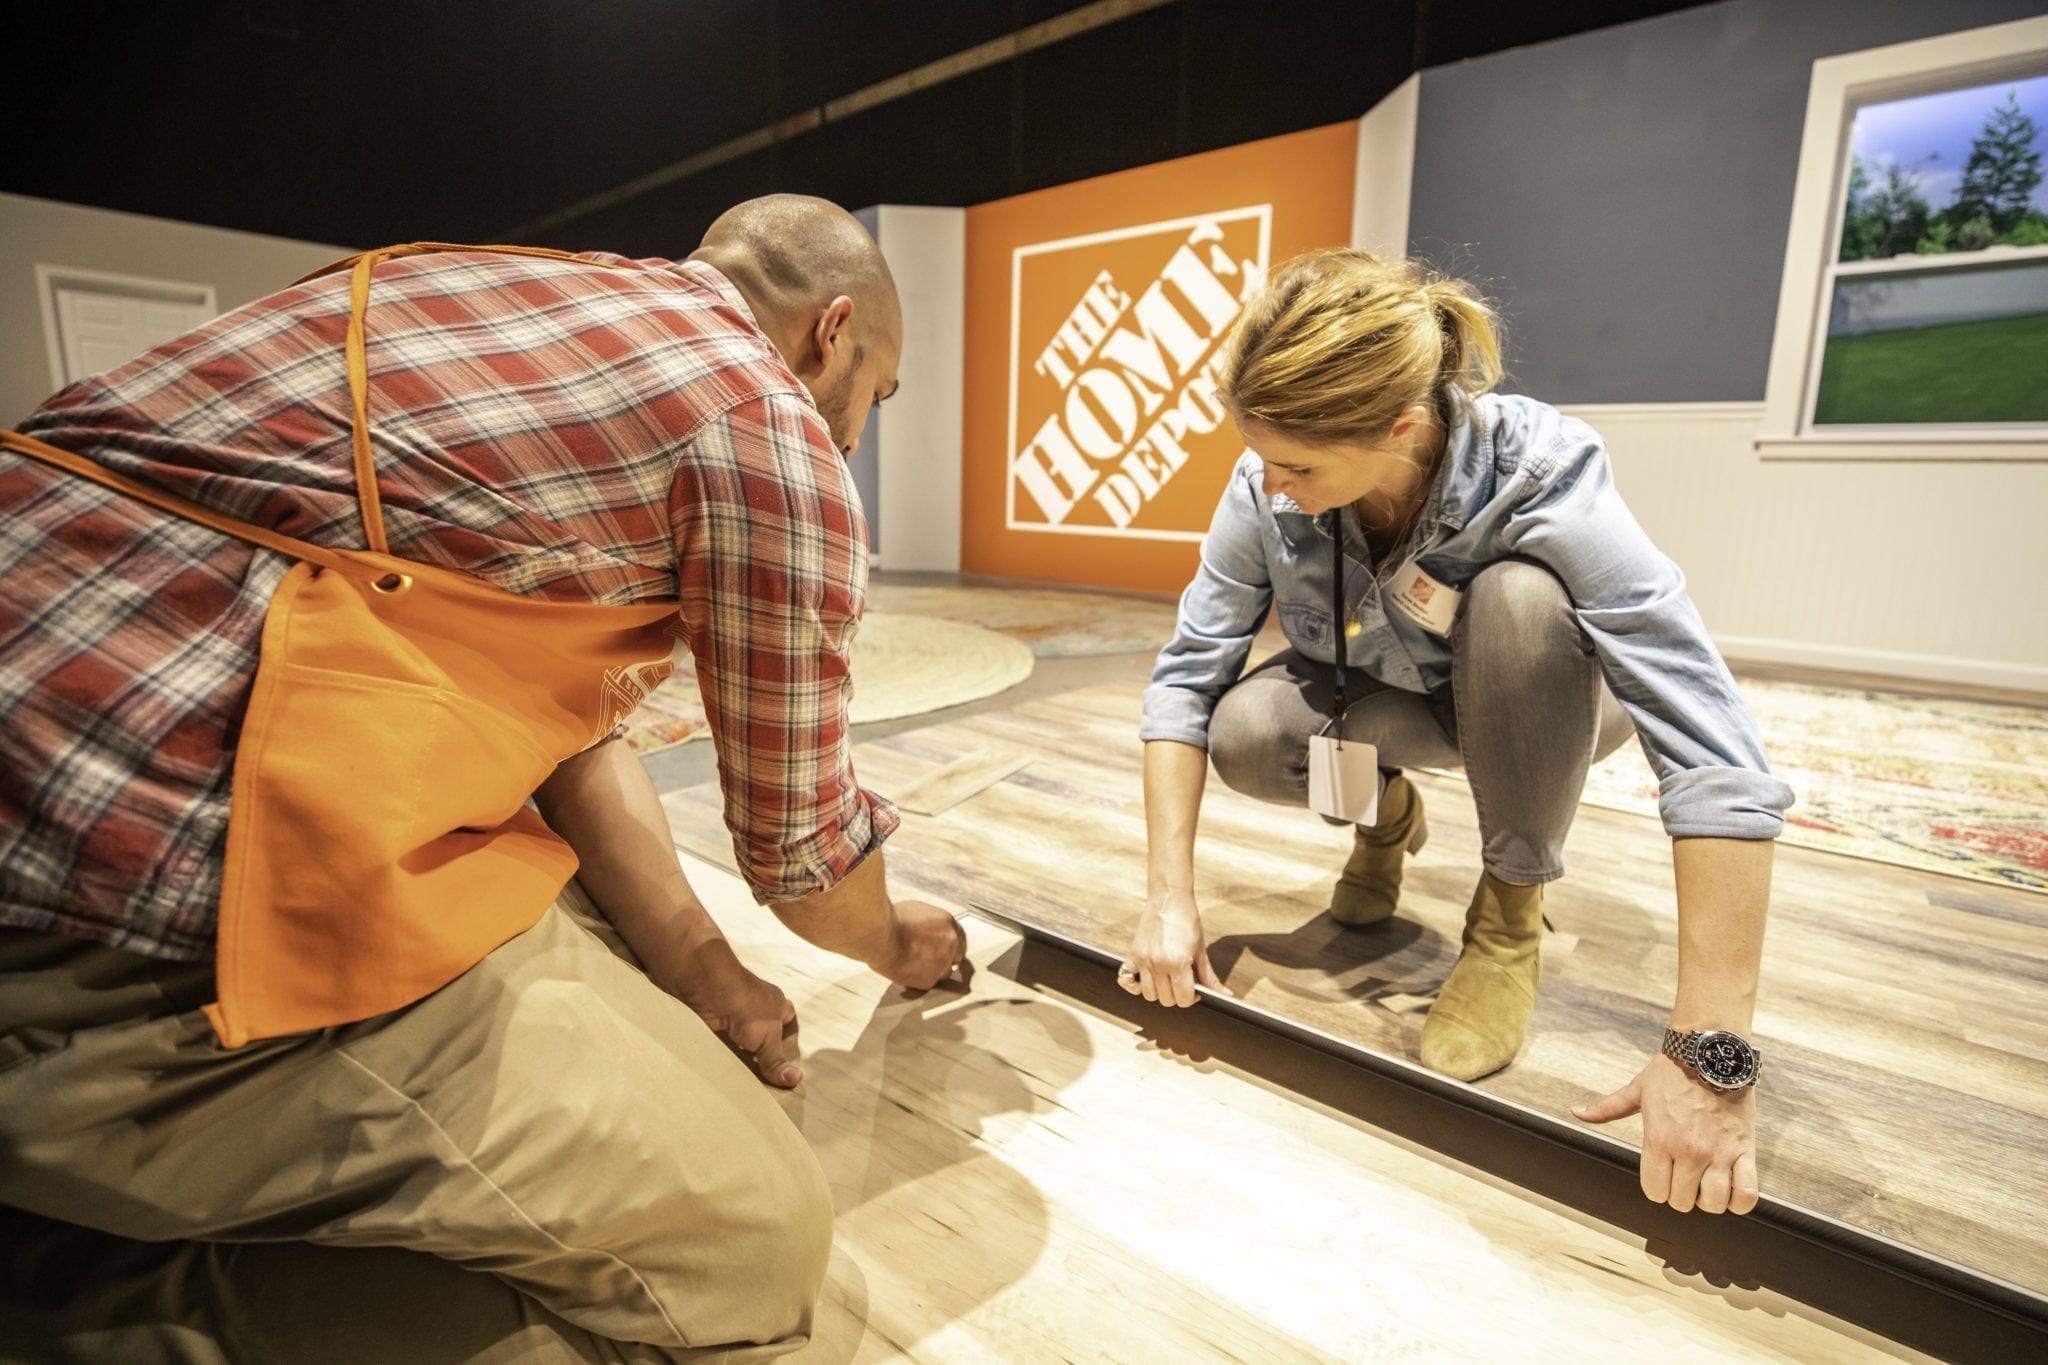 How to put floors in yourself. Tips from The Home Depot for flooring.